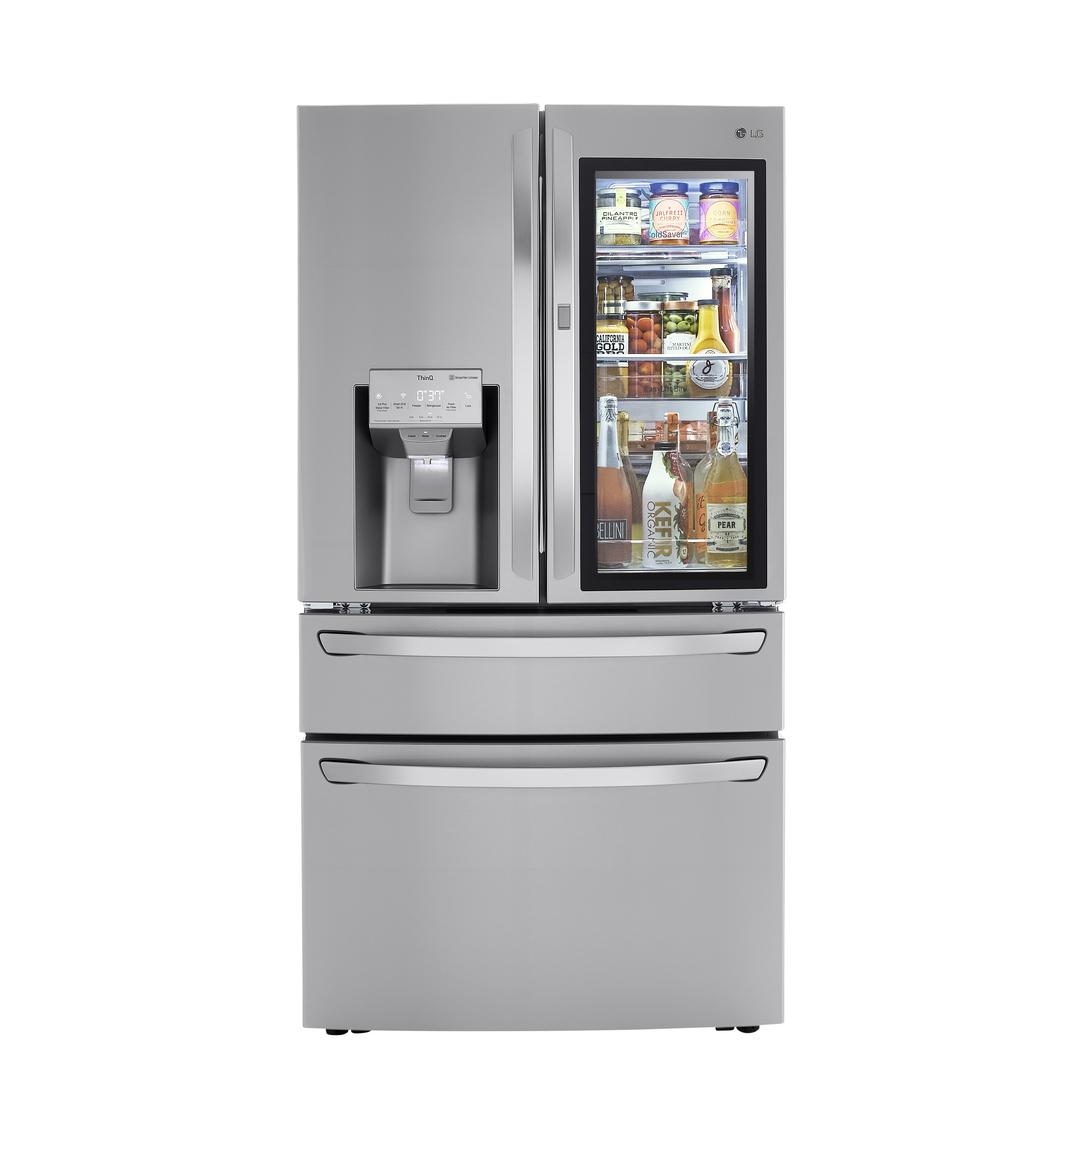 LG - 35.75 Inch 29.5 cu. ft French Door Refrigerator in Stainless - LRMVS3006S